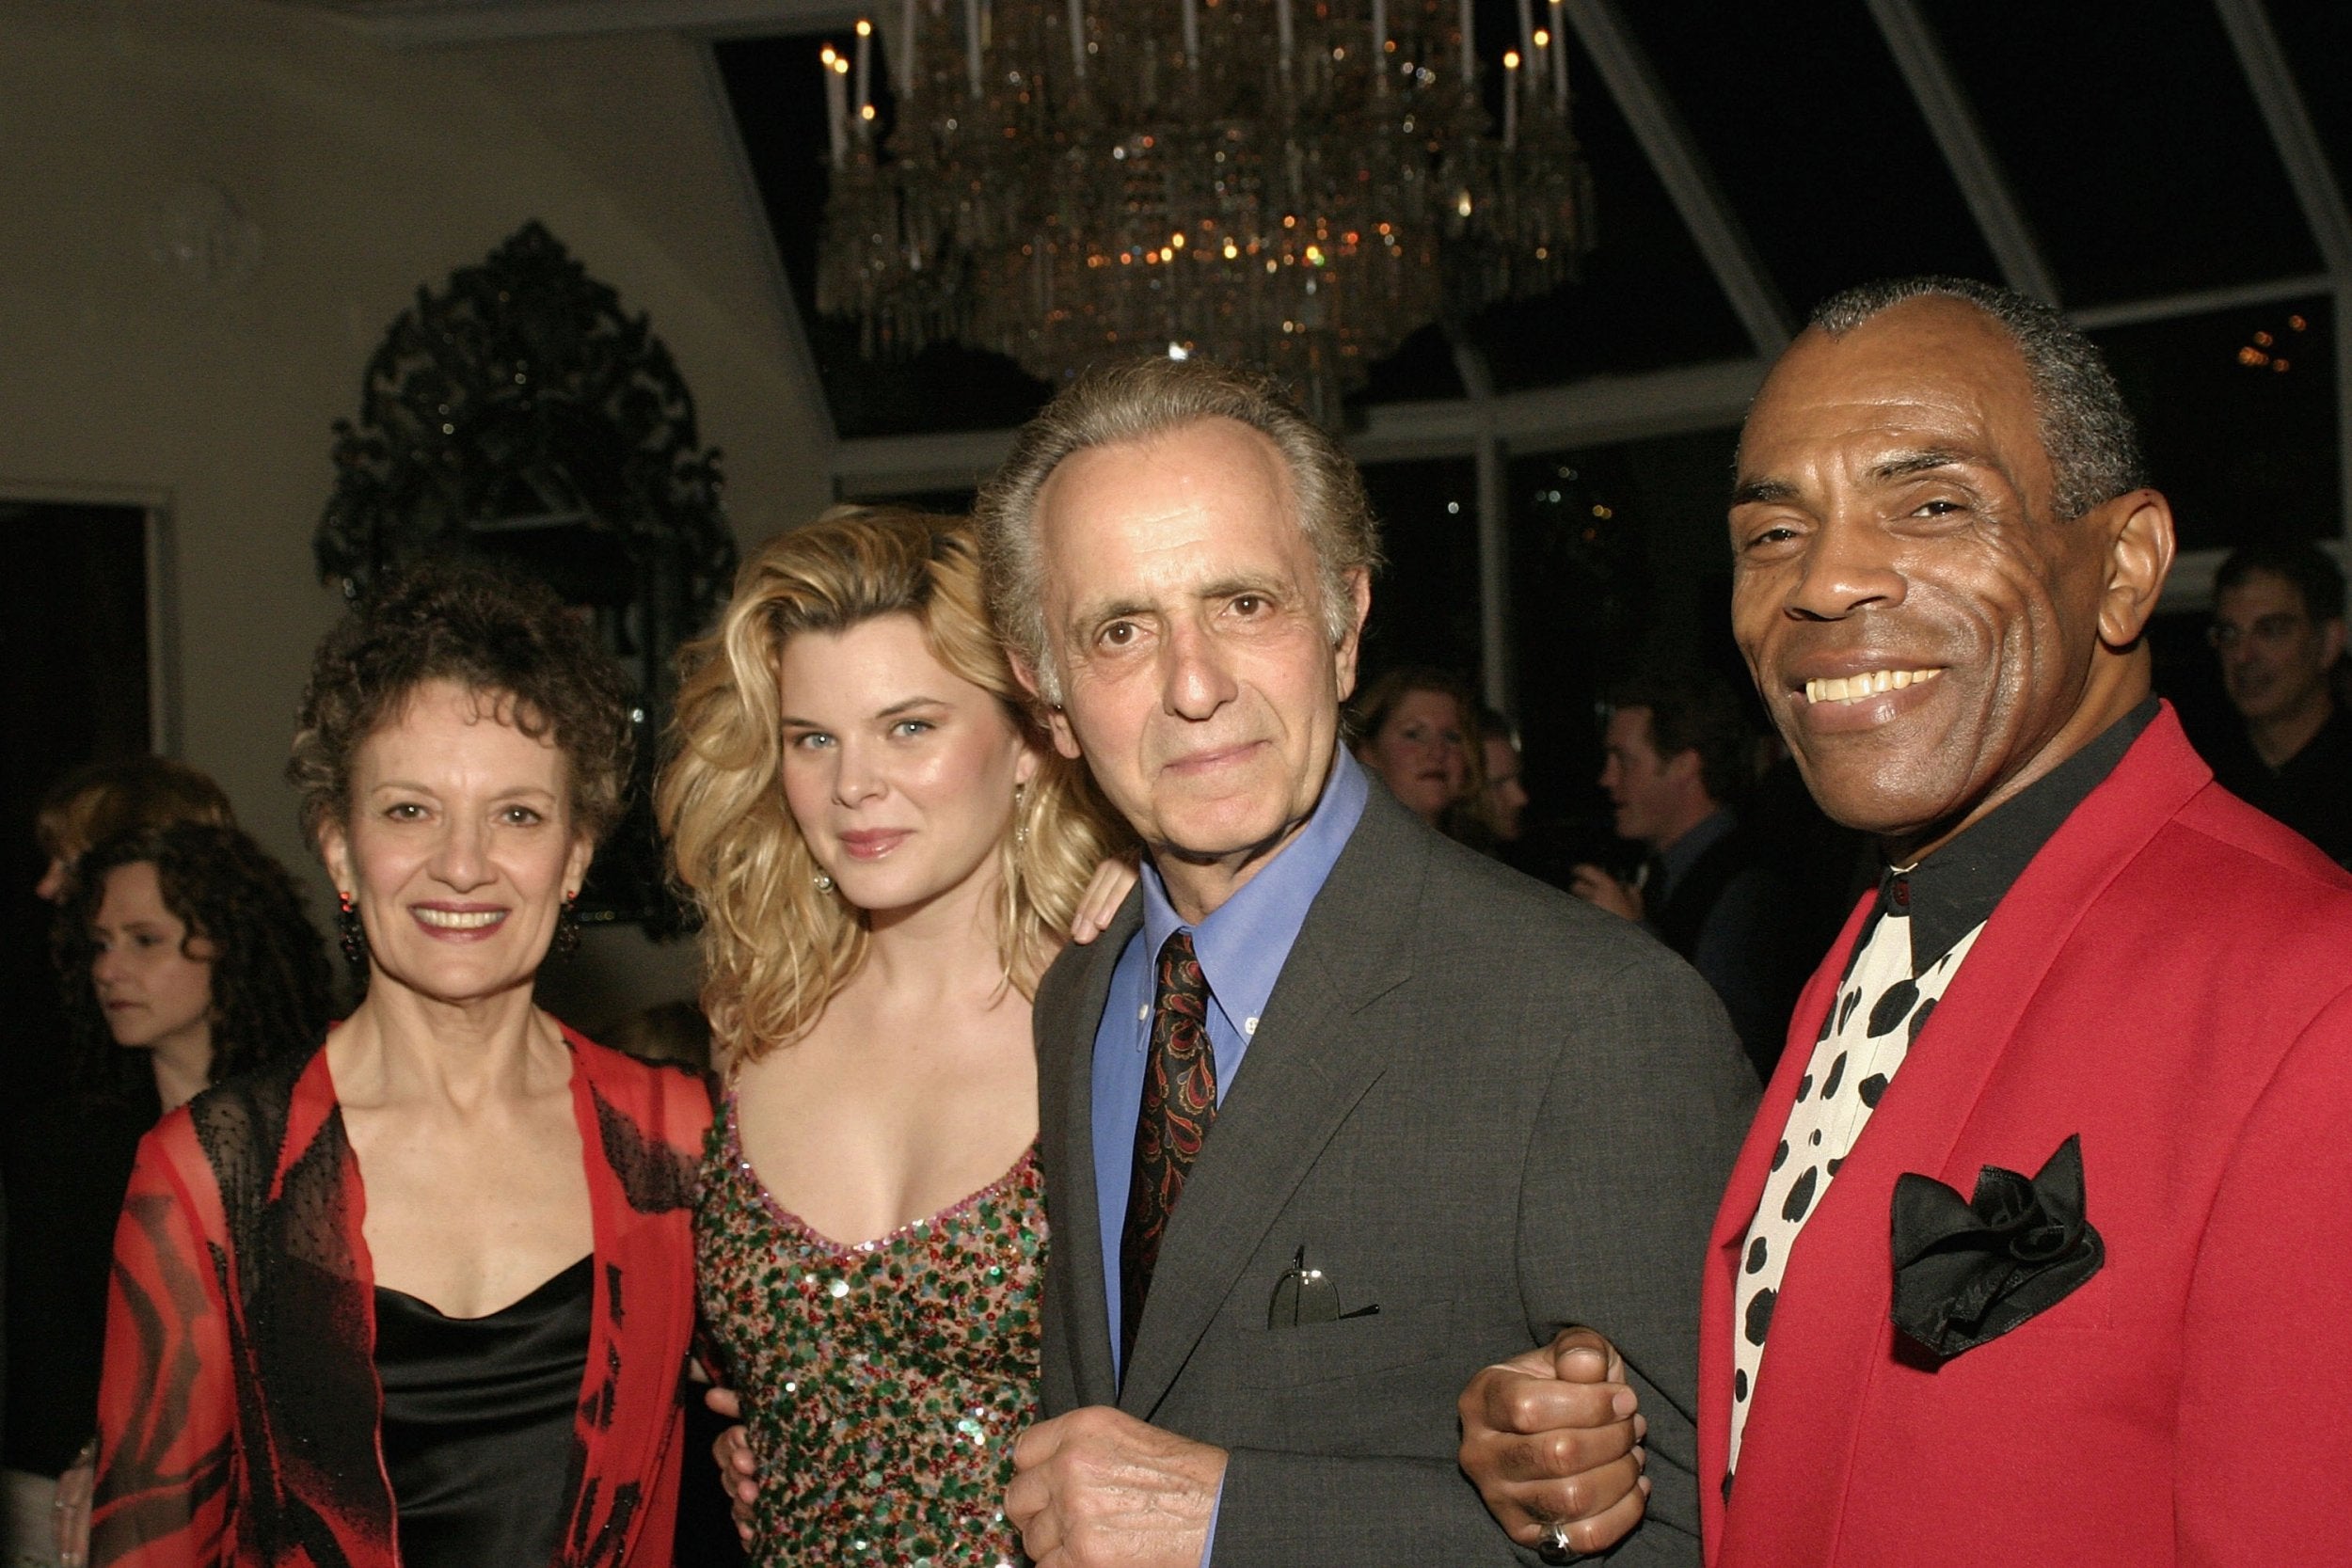 Medoff with ‘Prymate’ cast members Phyllis Frelich, Heather Tom and Andre De Shields on its opening night in 2004